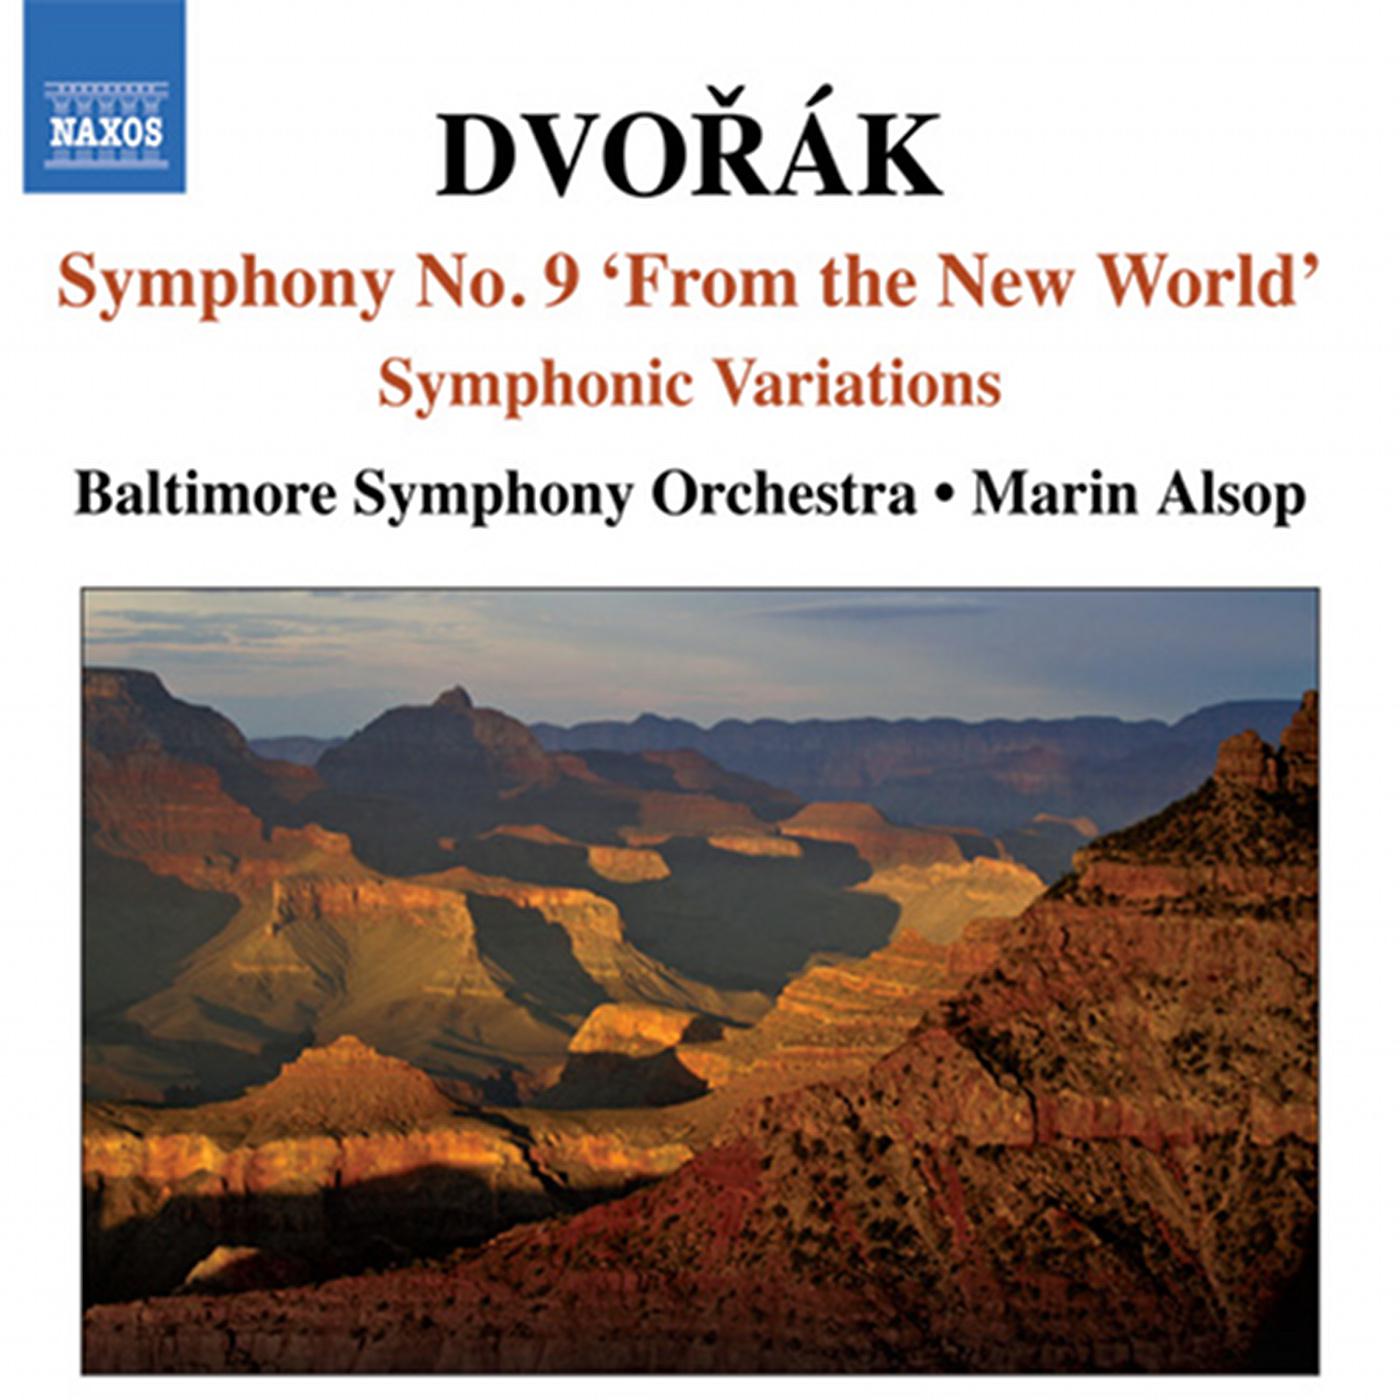 Symphony No. 9 in E Minor, Op. 95, B. 178, "From the New World": III. Scherzo: Molto vivace Symphony No. 9 in E Minor, Op. 95, B. 178, "From the New World"